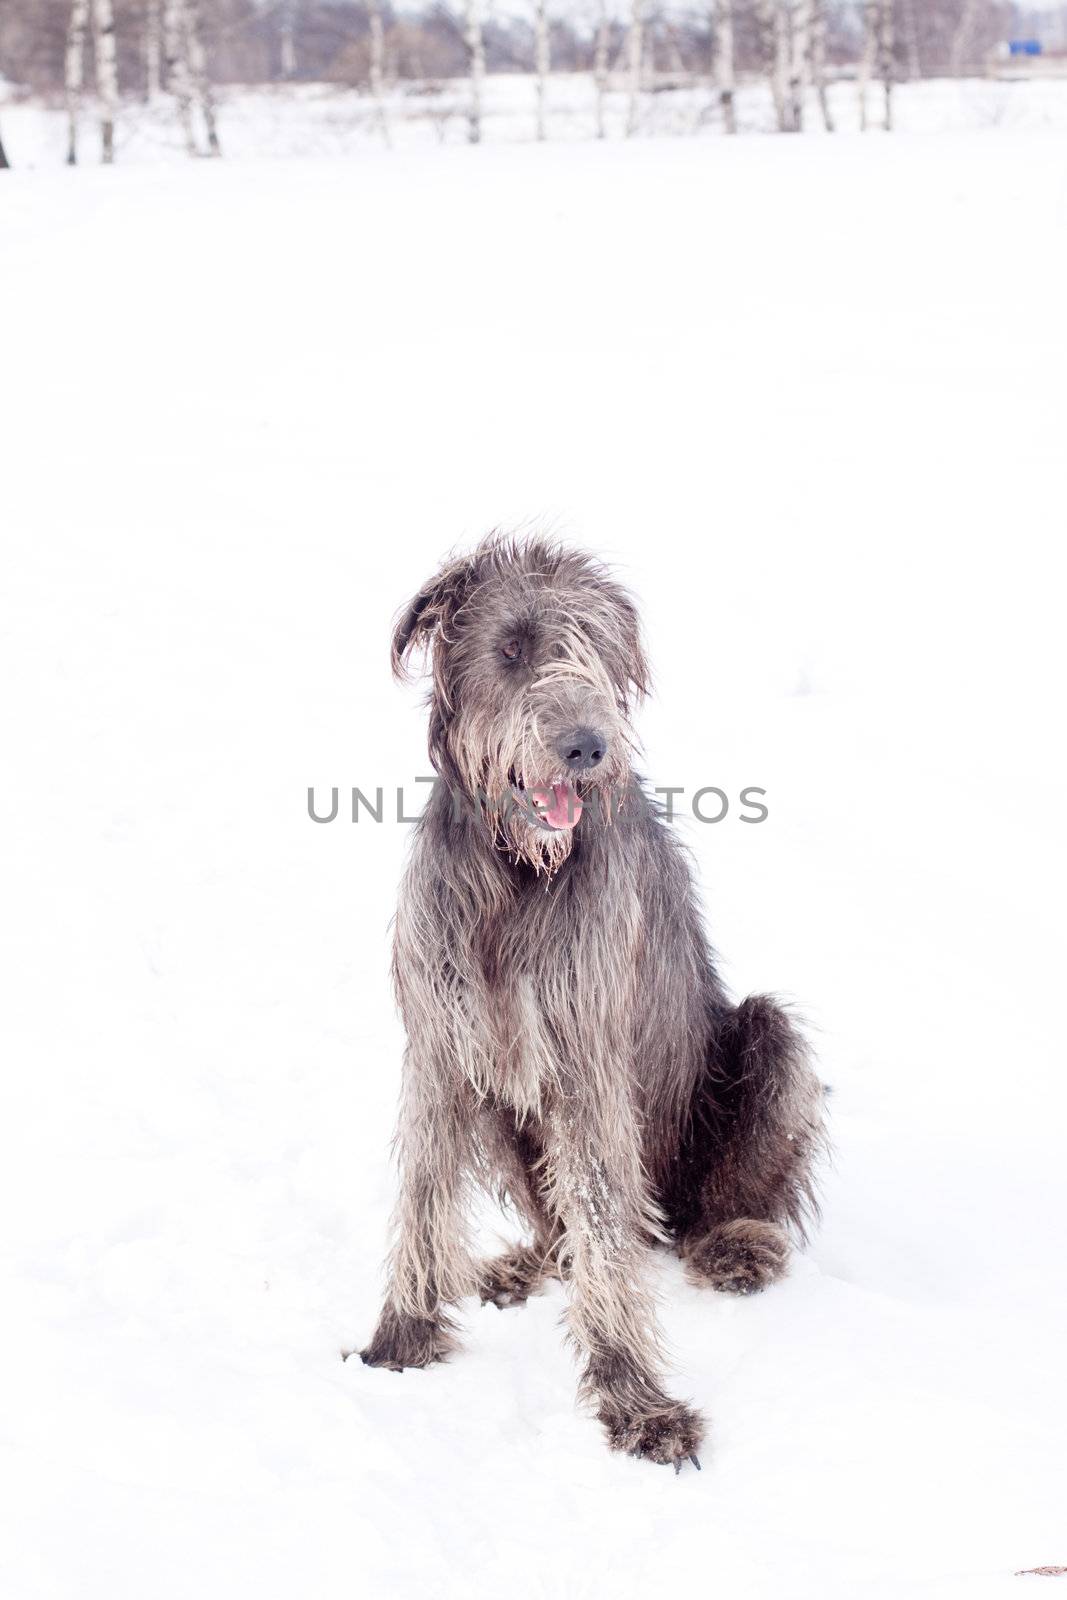 An Irish wolfhound sitting on a snow-covered field
